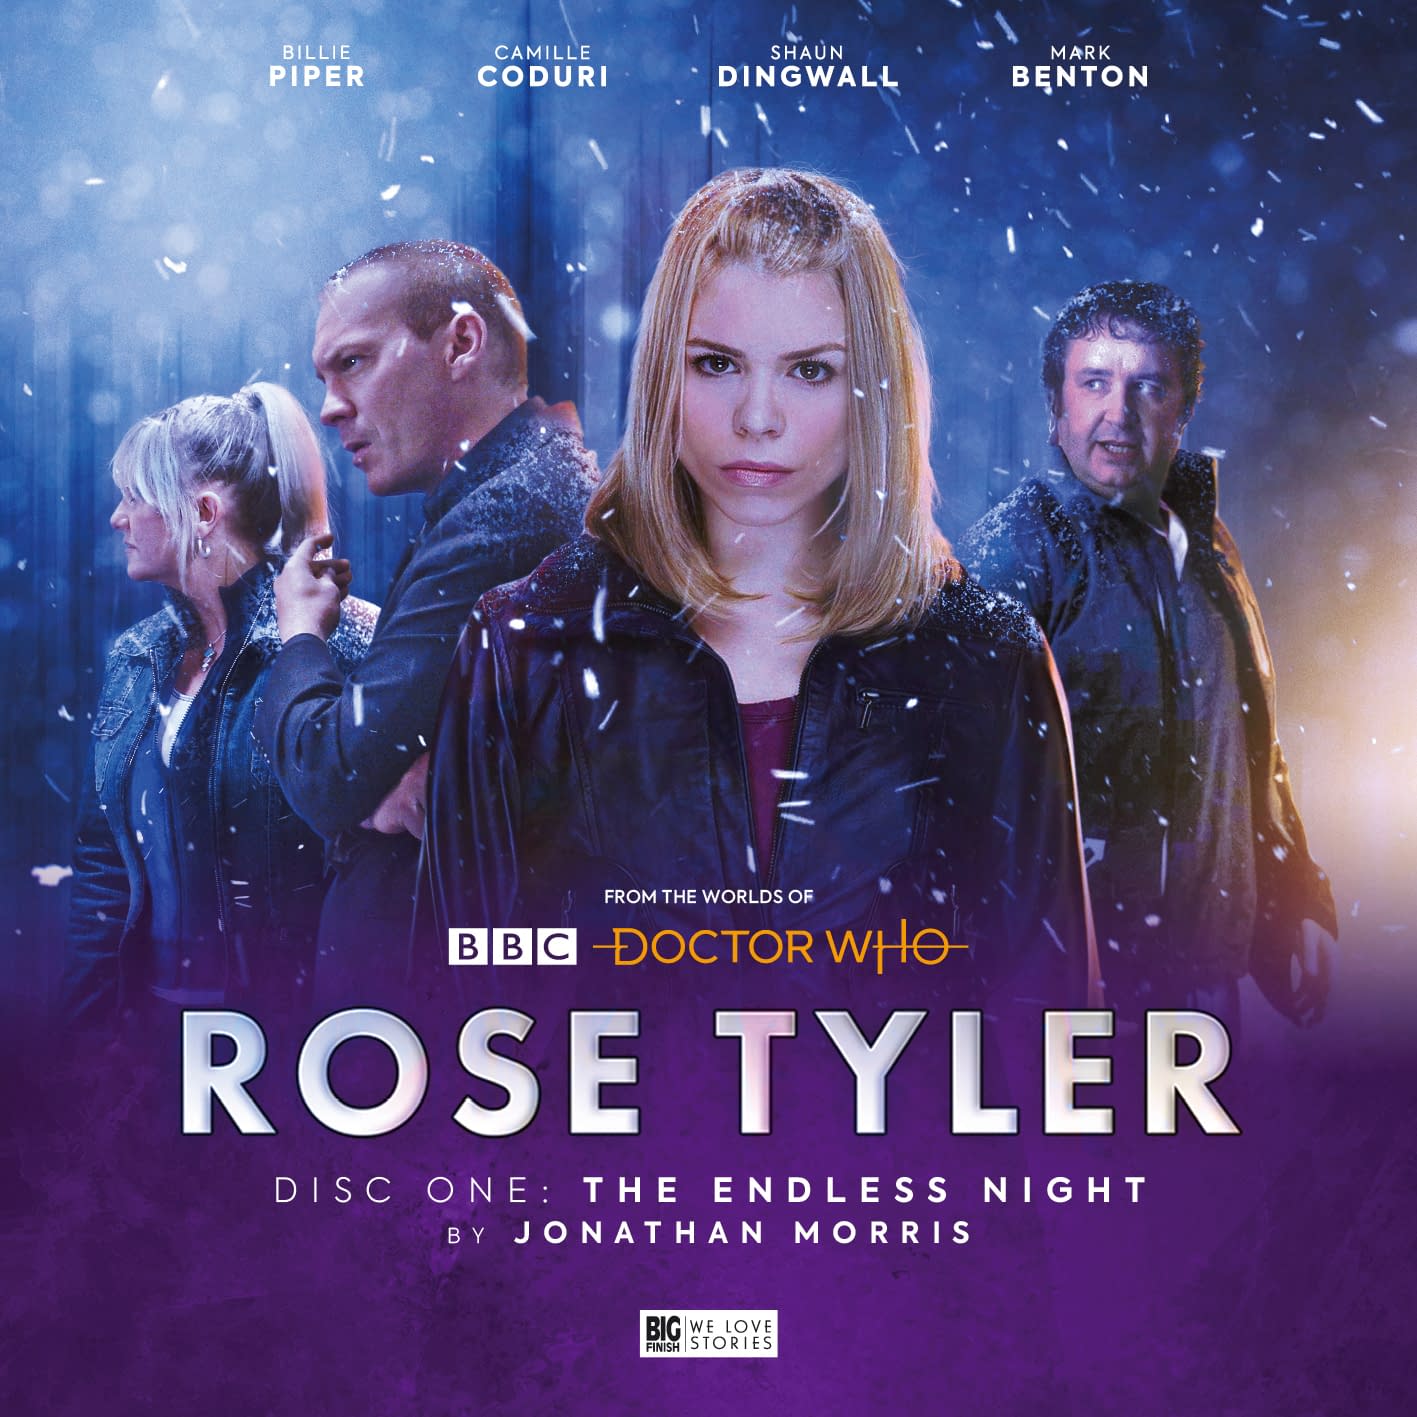 "Doctor Who": Billie Piper Returns in Big Finish Audio Drama "Rose Tyler: The Dimension Cannon"